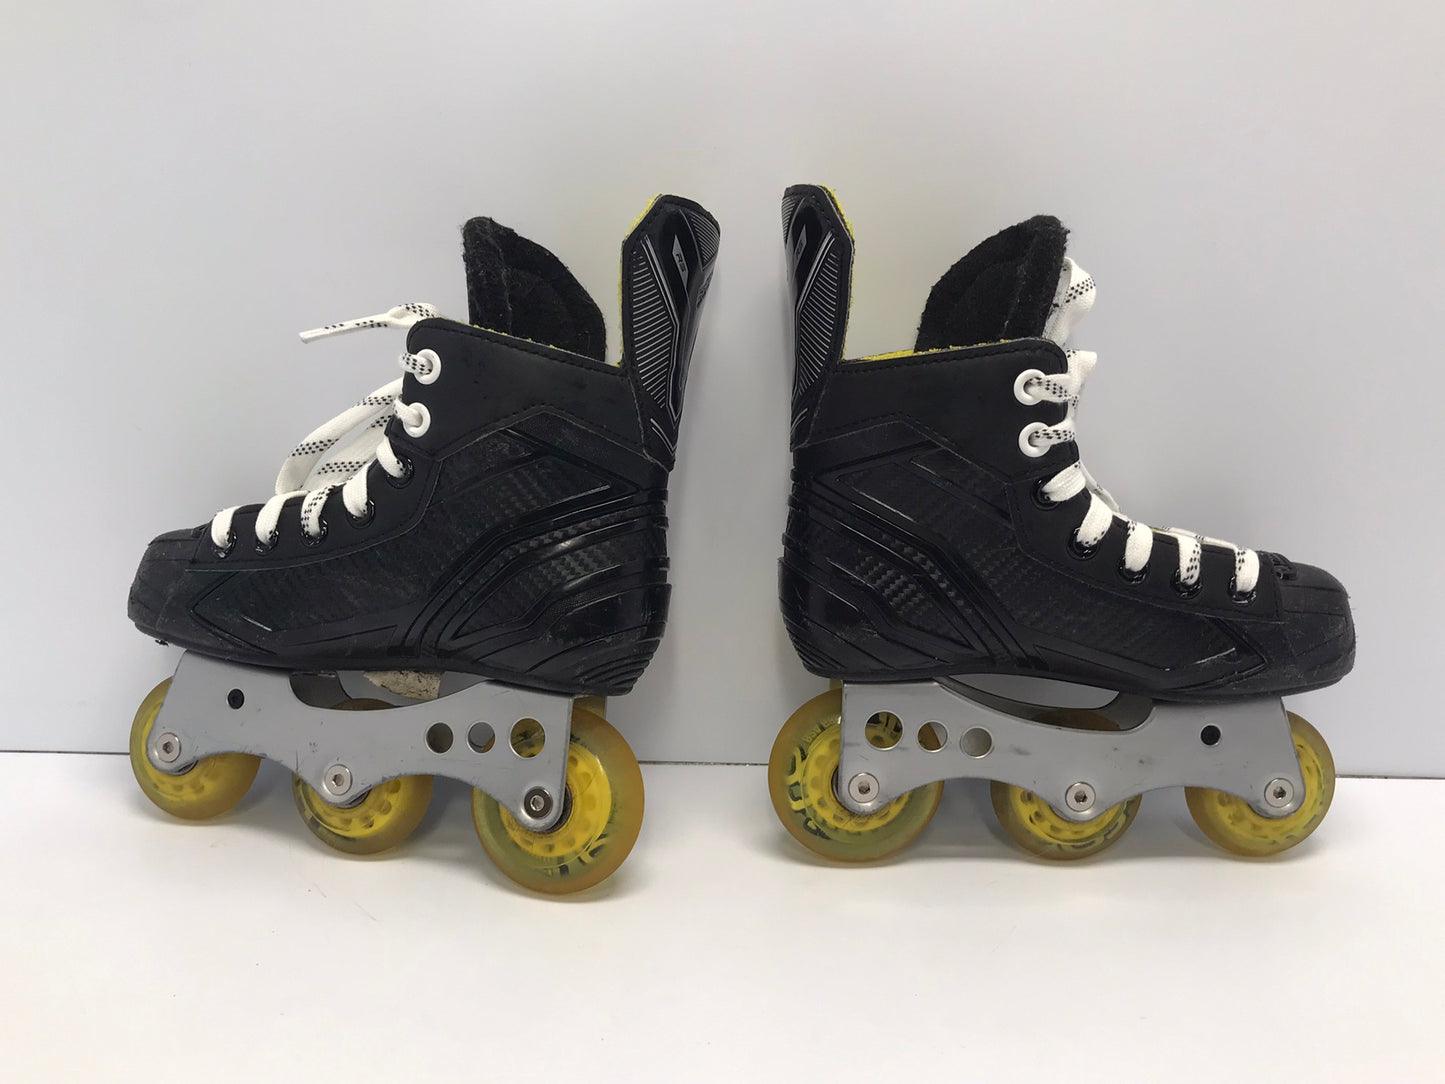 Hockey Roller Hockey Child Size 1 Bauer With Rubber Wheels Excellent